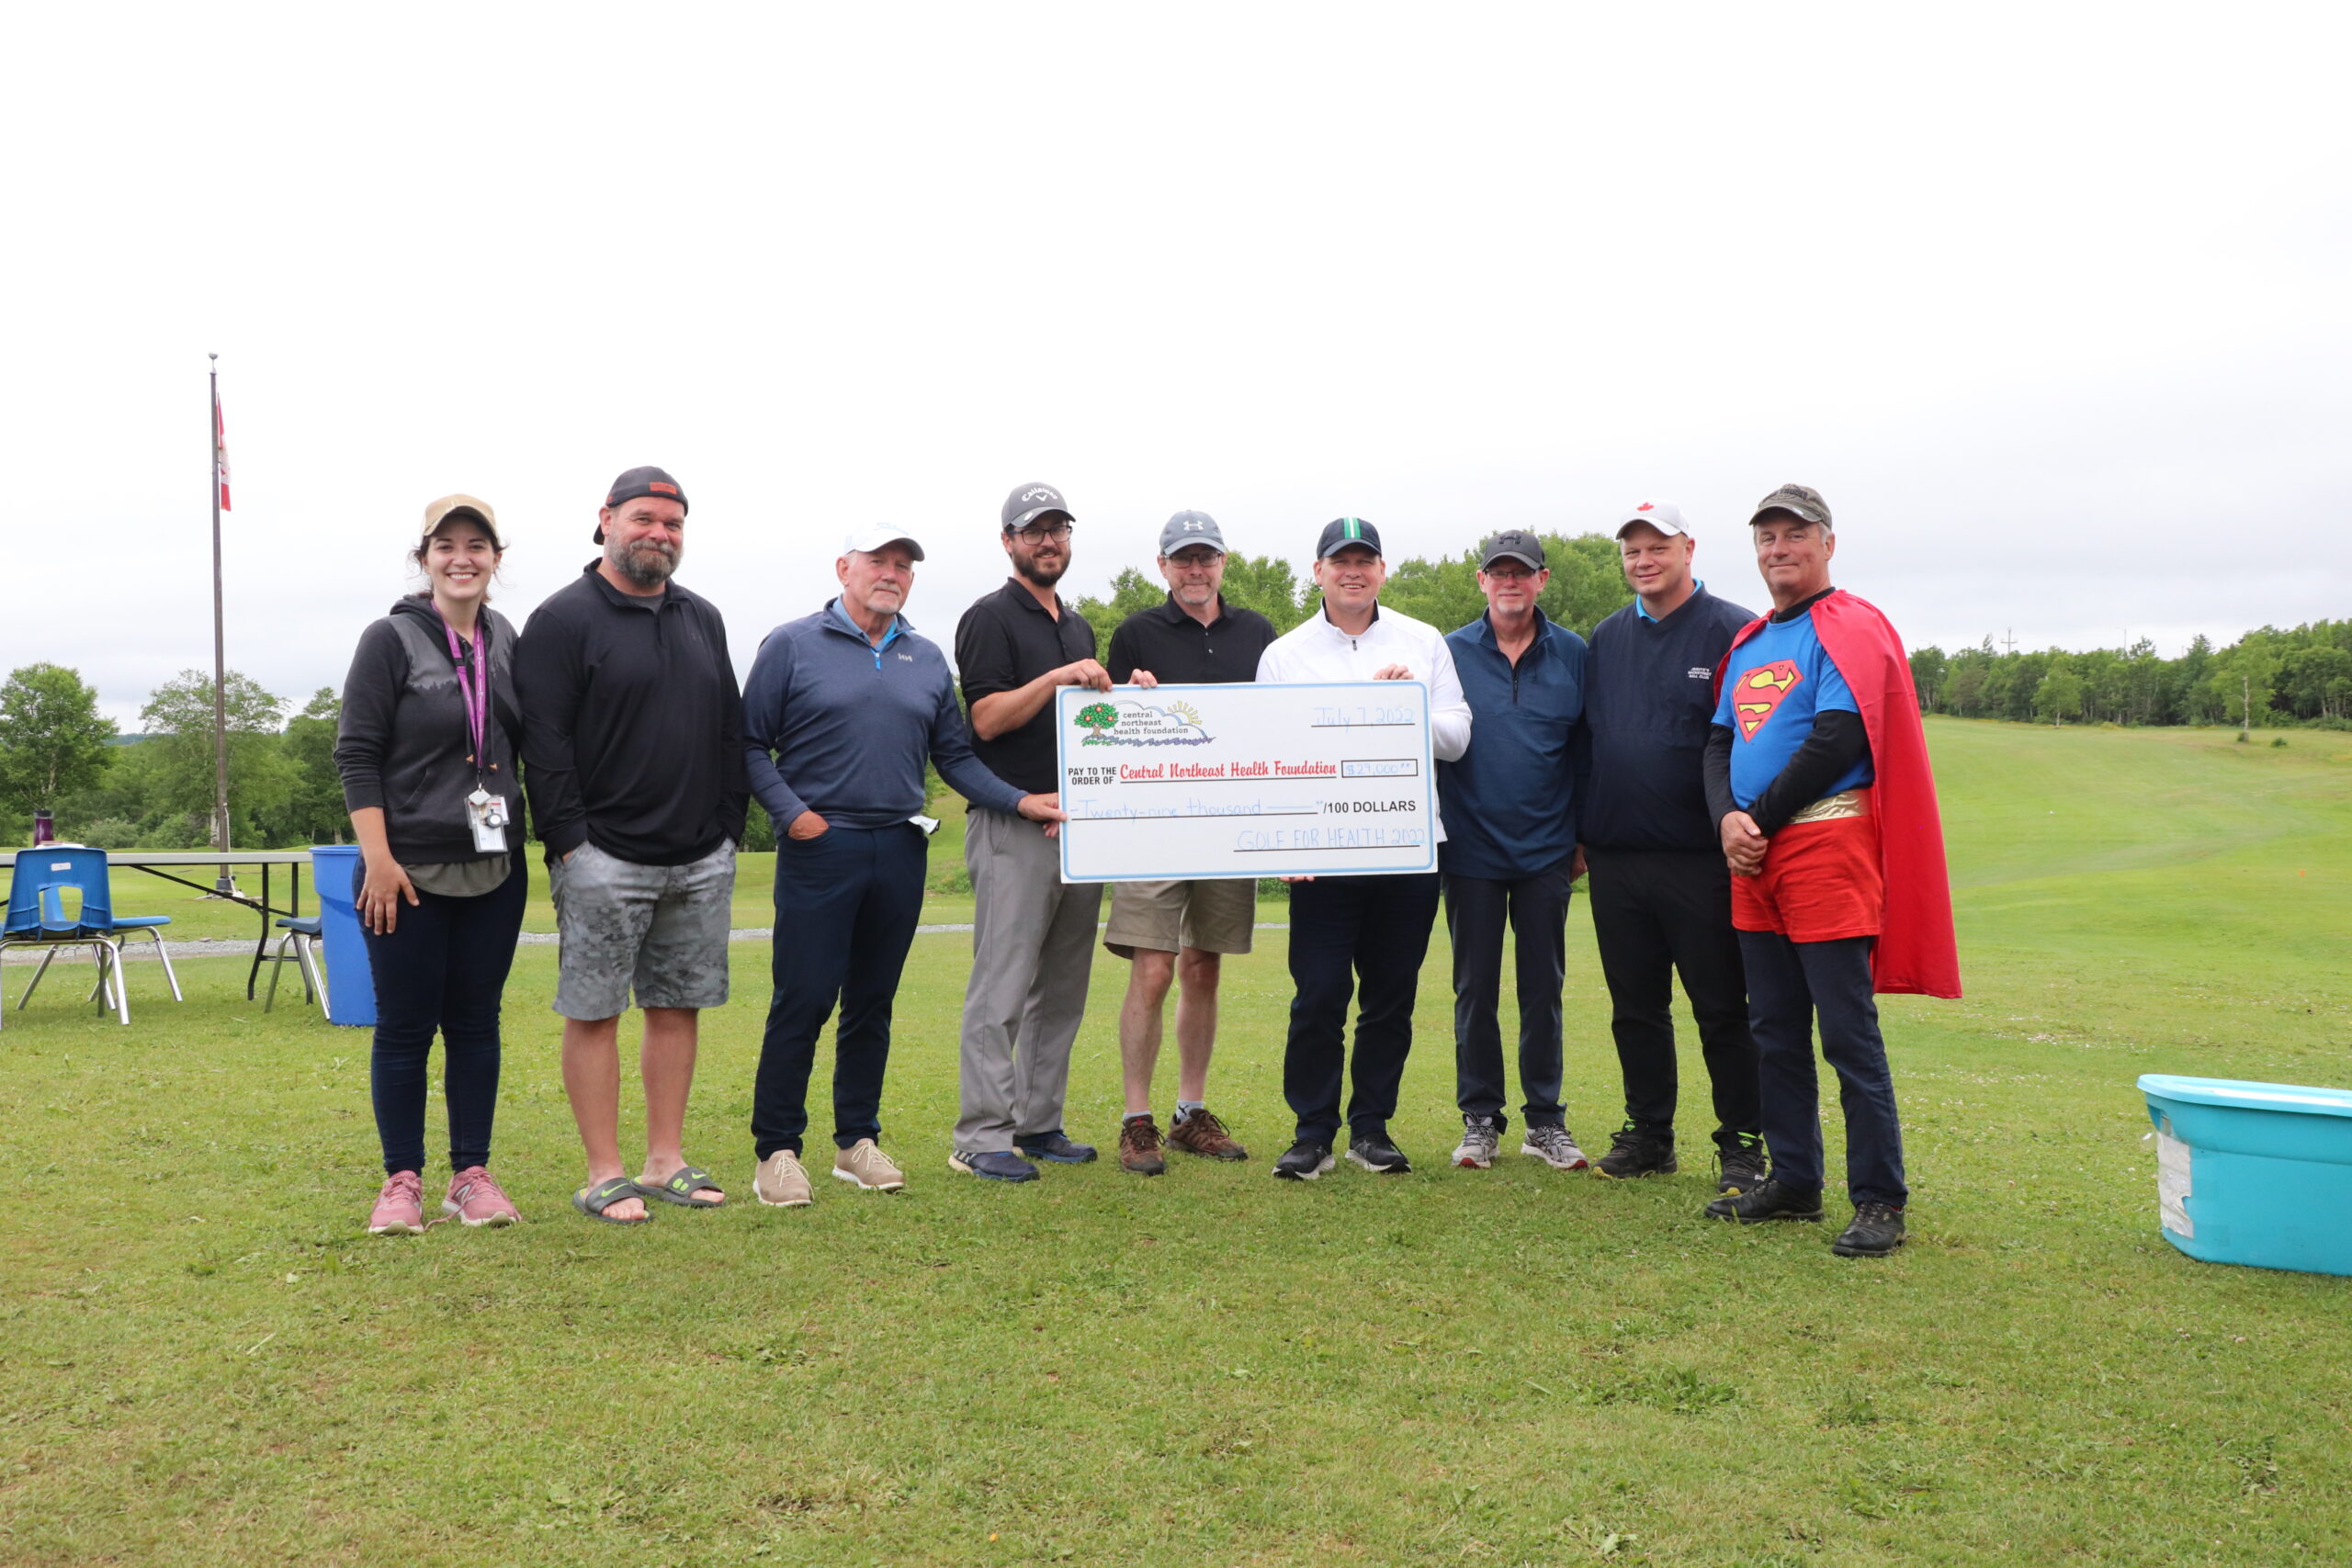 2022 Golf for Health Tournament - Over $29,000 raised!